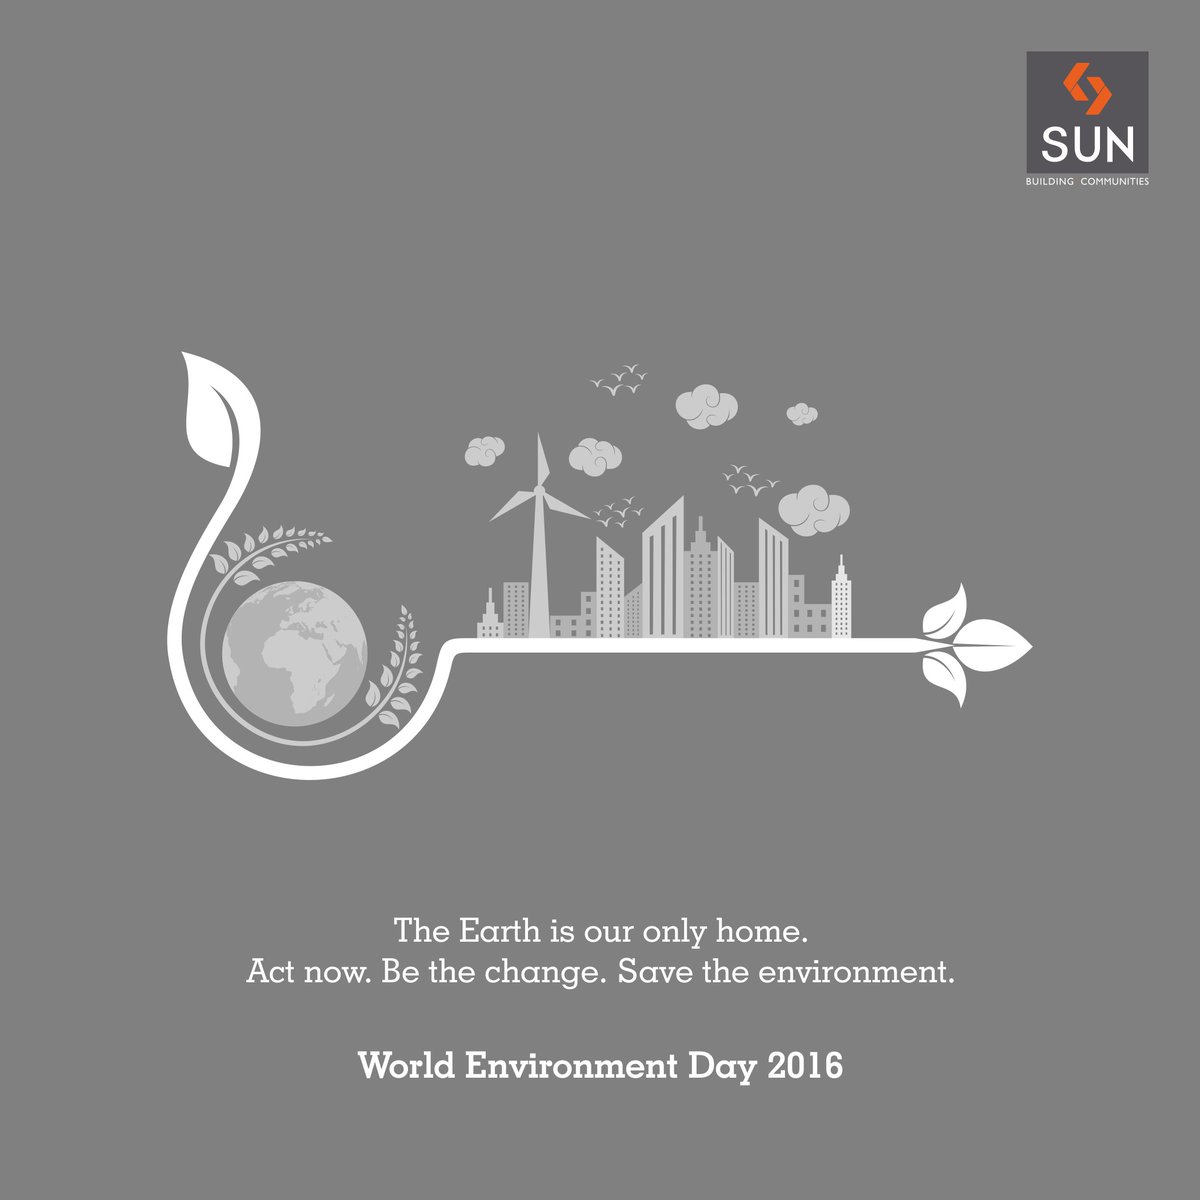 Let's stand together and spread the word to save the planet on #WorldEnvironmentDay 2016. #SaveEarth https://t.co/DZ6VvQirm9